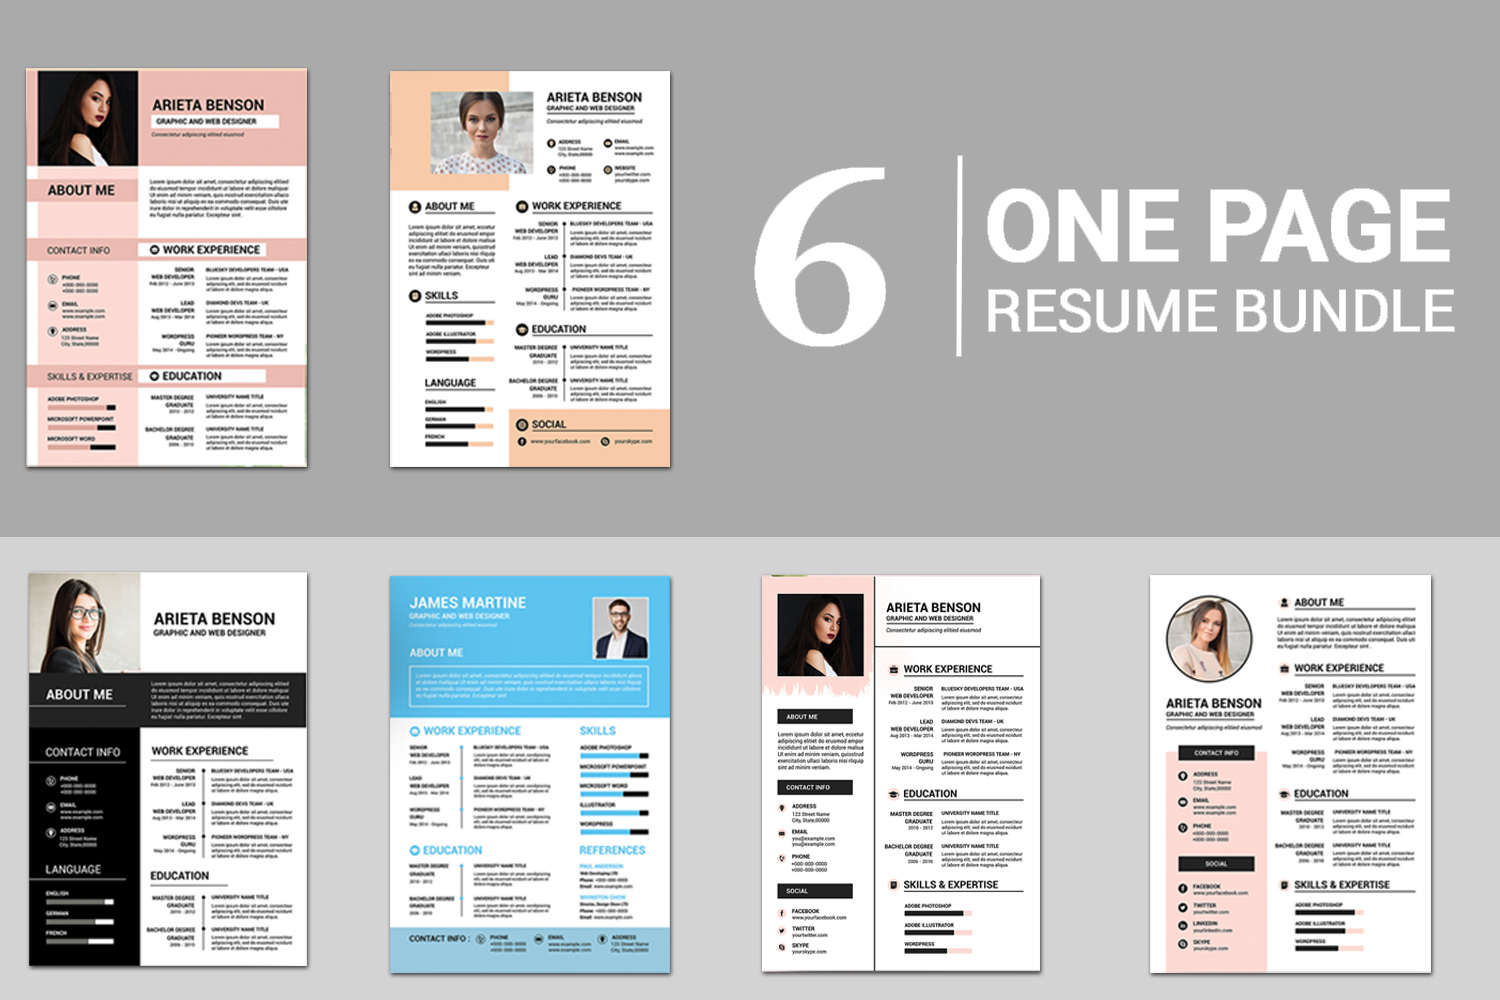 Minimal One Page Resume Bundle. Ms Word and Photoshop Template